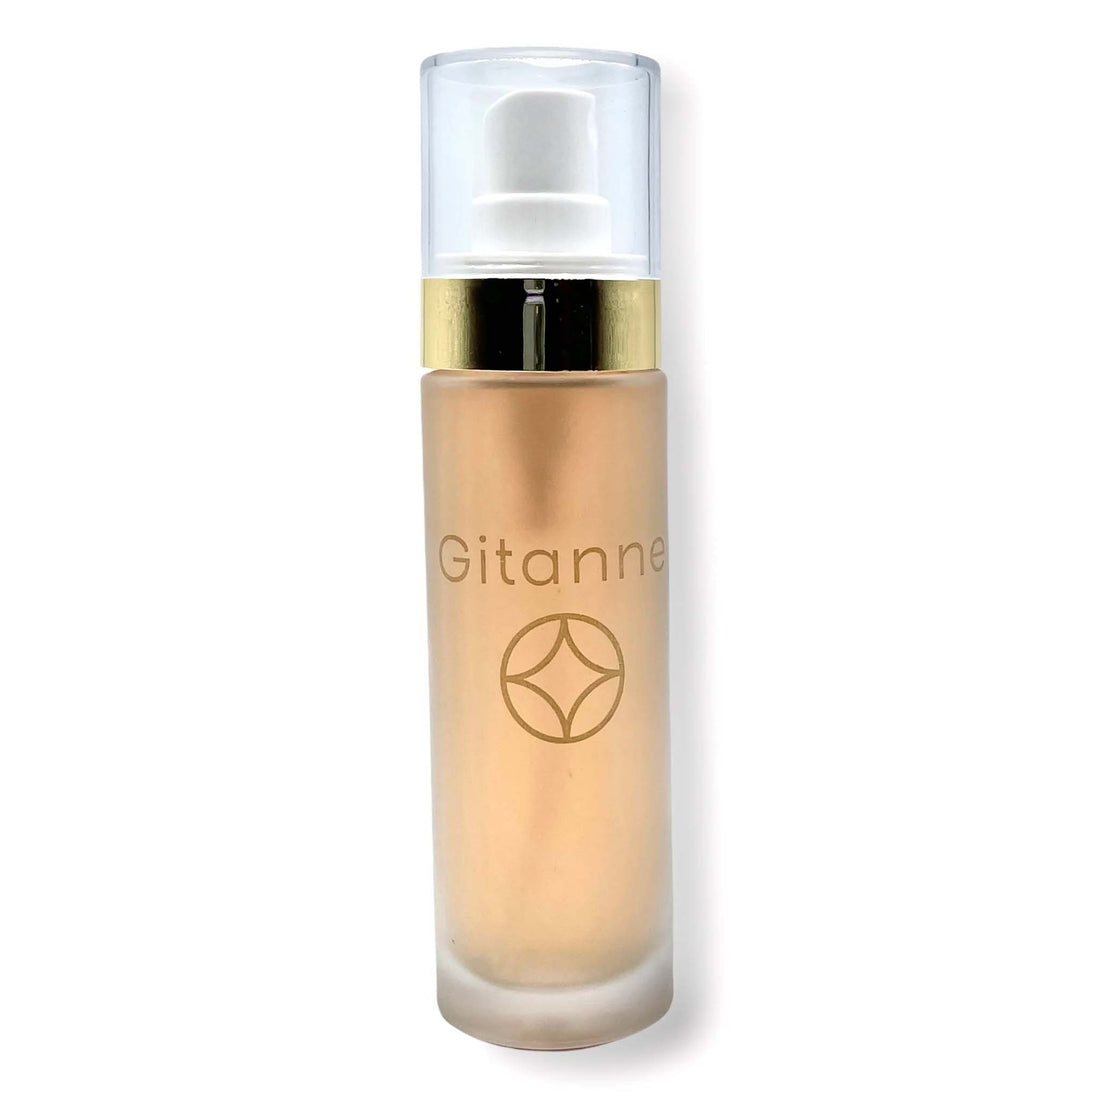 Gitanne Cascade Glow Face Mist provides hydration, balancing of the skins PH and a fresh face.